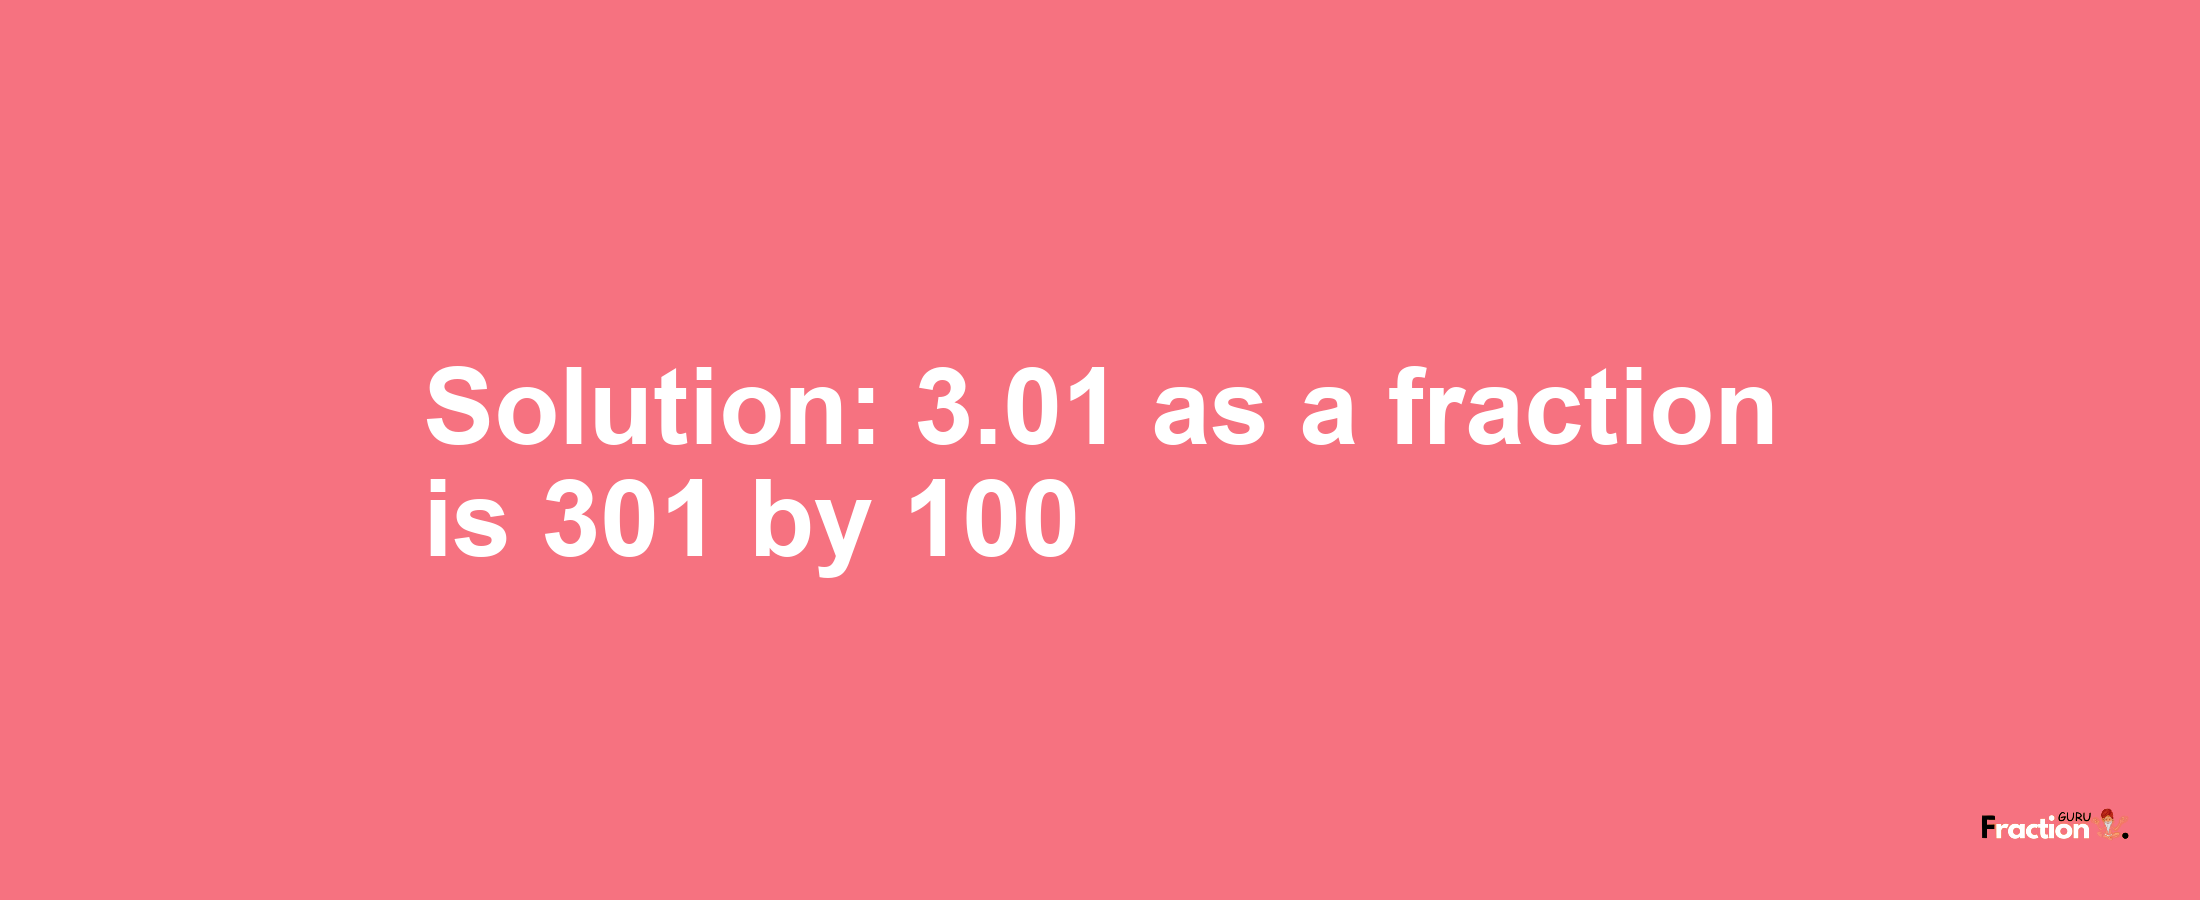 Solution:3.01 as a fraction is 301/100